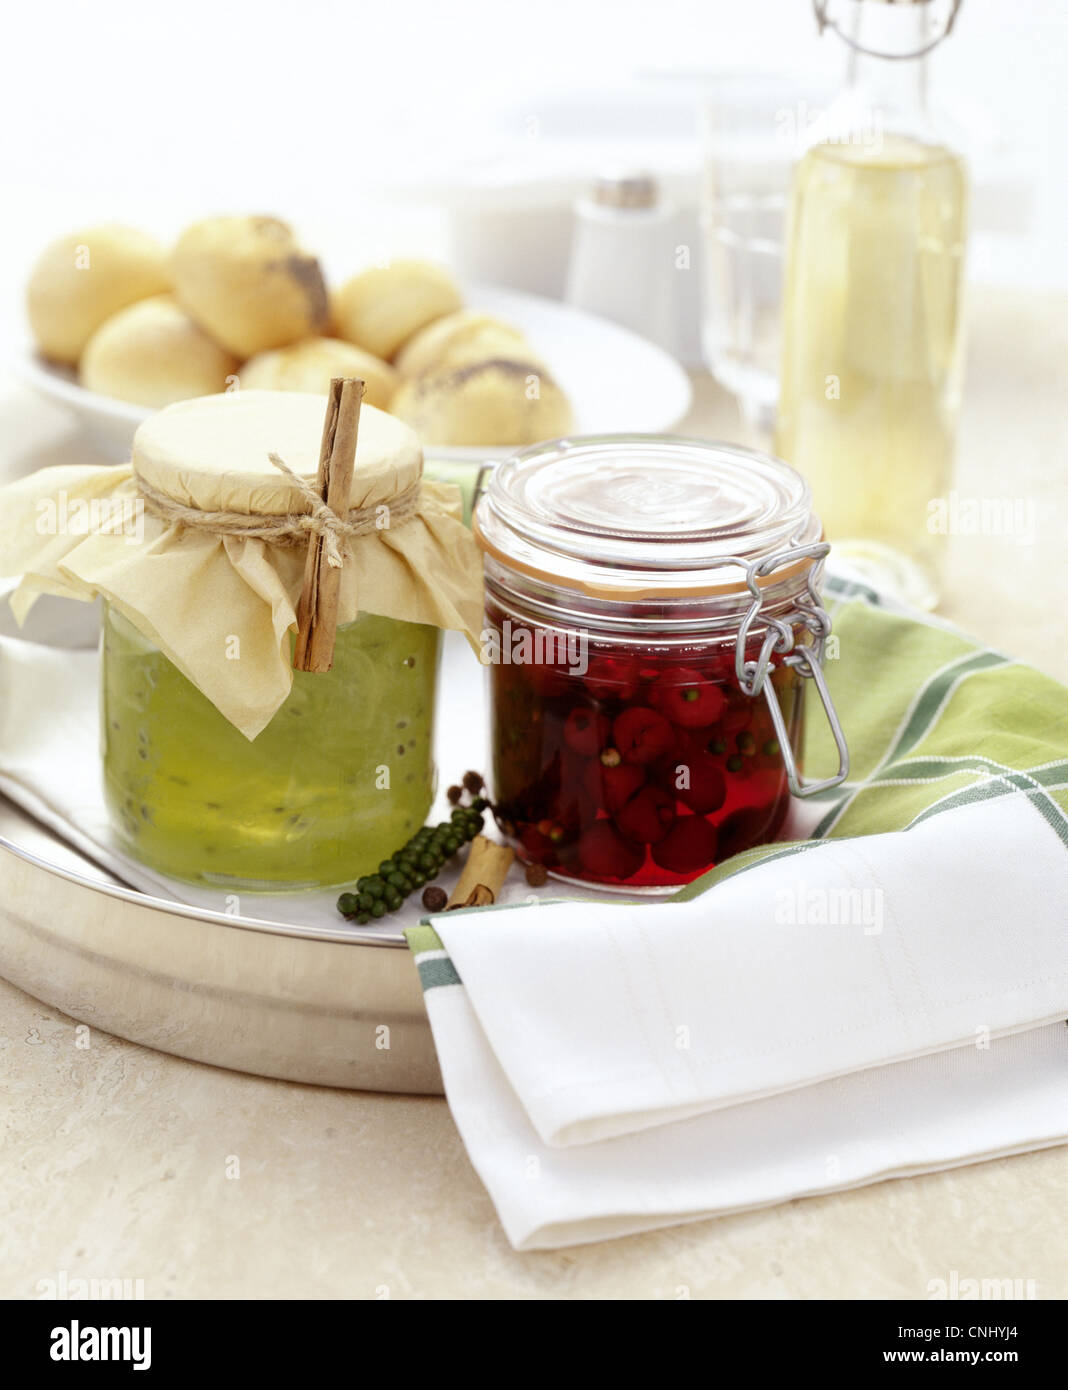 Tableau: Gooseberry marmelade / redwine cherries with green pepper Stock Photo